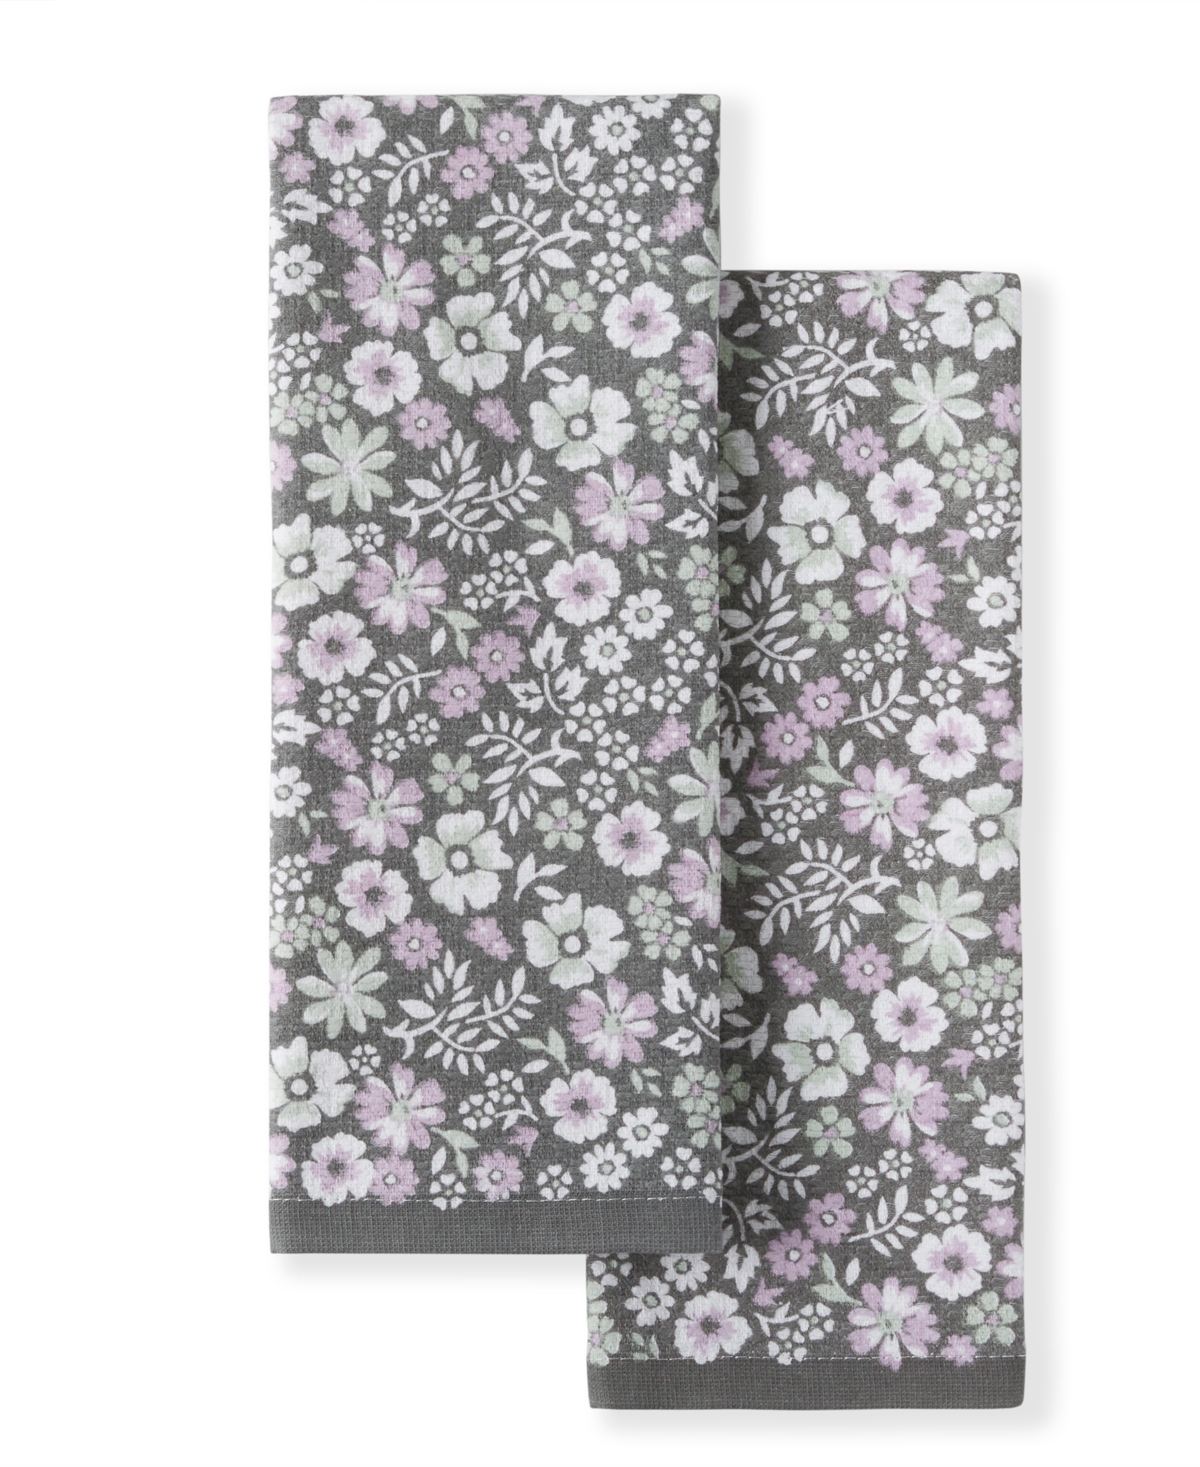 Ditsy Floral Dual Purpose Kitchen Towel 2- Pack Set, 16" x 28" - Gray